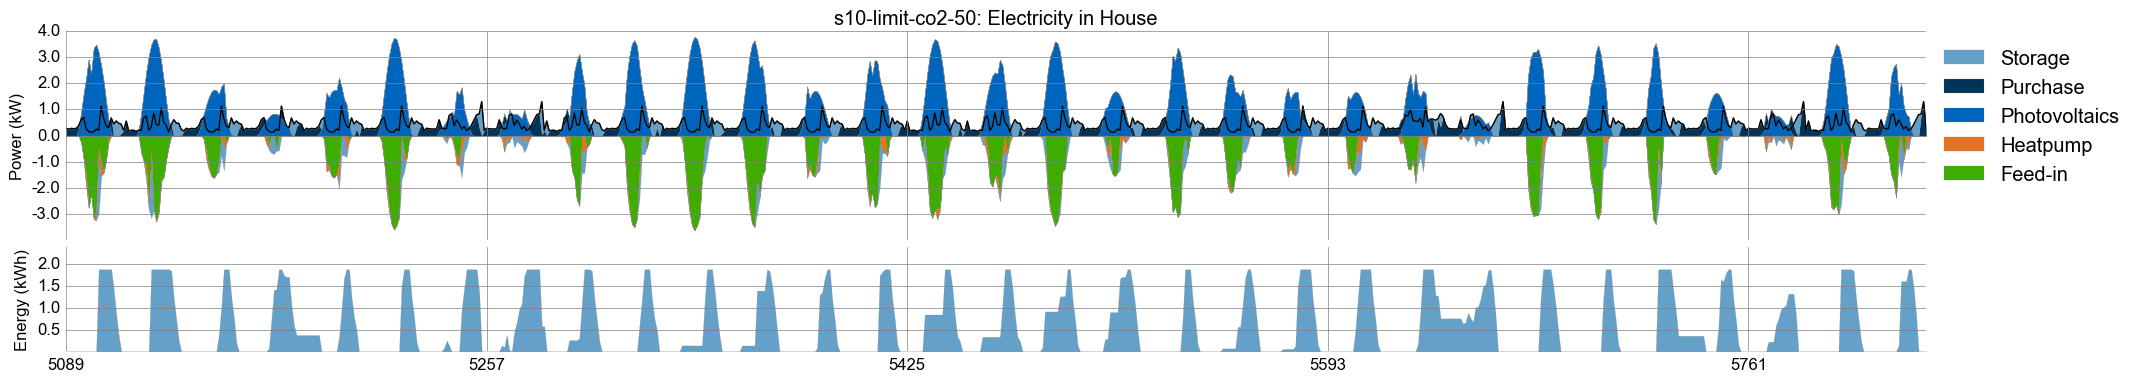 Timeseries plot of month August for electricity generation in scenario s10: CO2 limit 50%